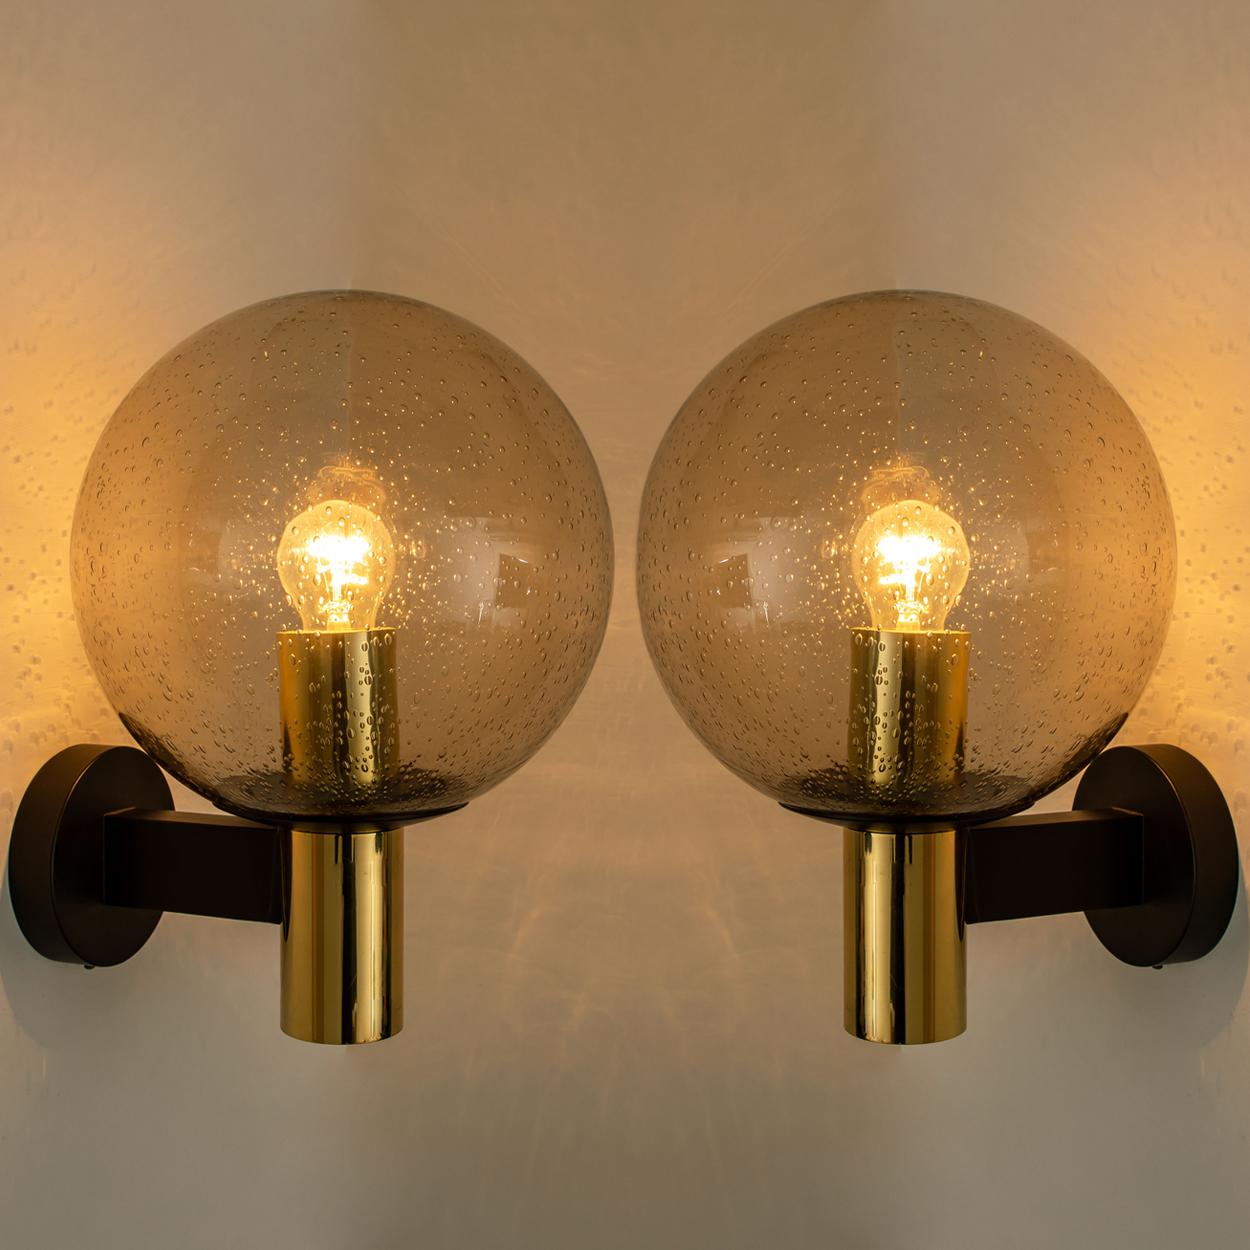 Metal 1 of the 3 Pair of Glass Brass Wall Lamps by Glashütte Limburg, 1975s For Sale